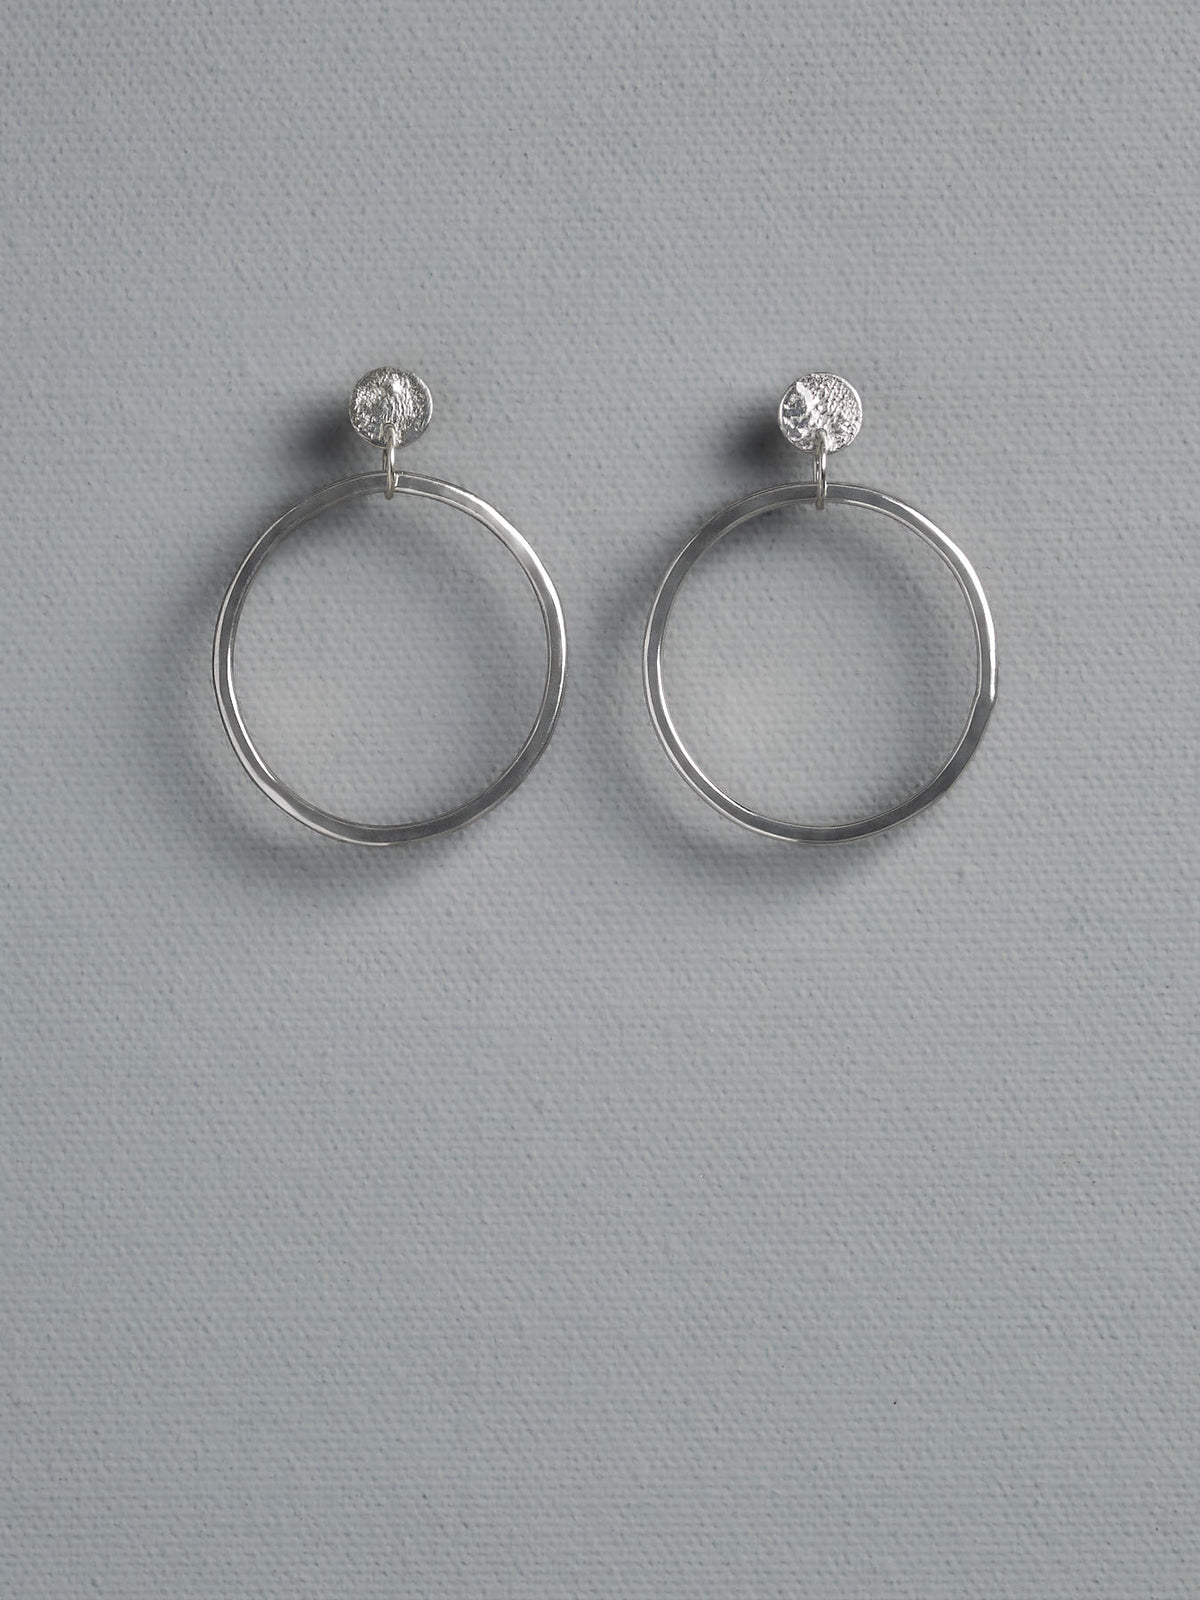 A pair of Ripple Loop Earrings by Amy Iddles Jeweller with a diamond in the middle.